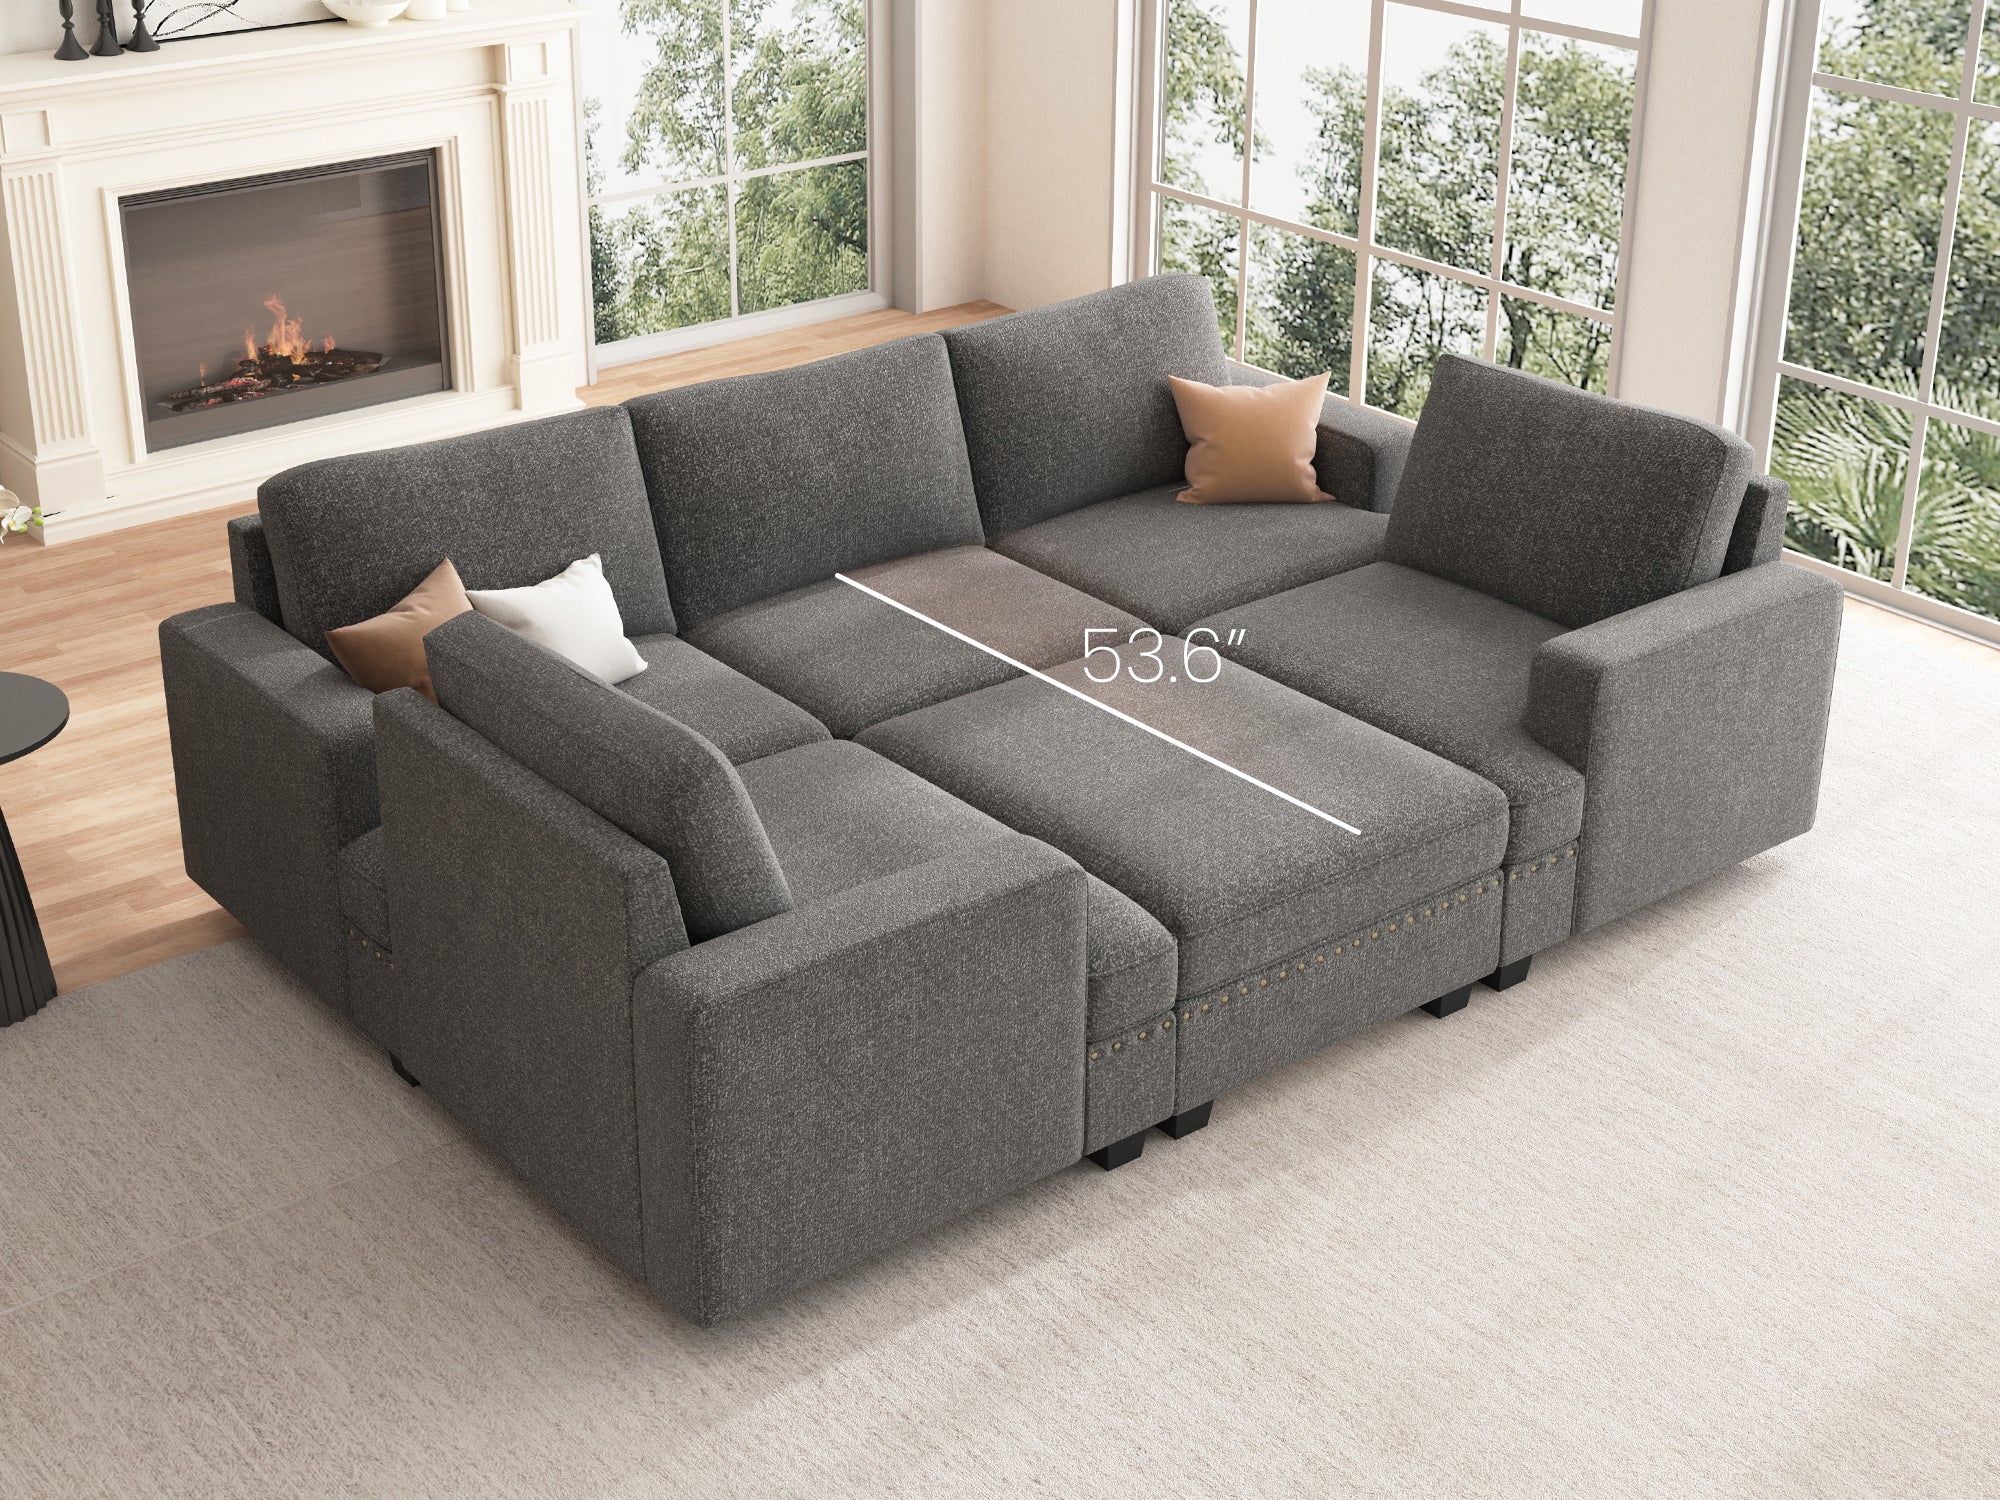 NOLANY 6-Piece Polyester Modular Sleeper Sectional With Storage Space